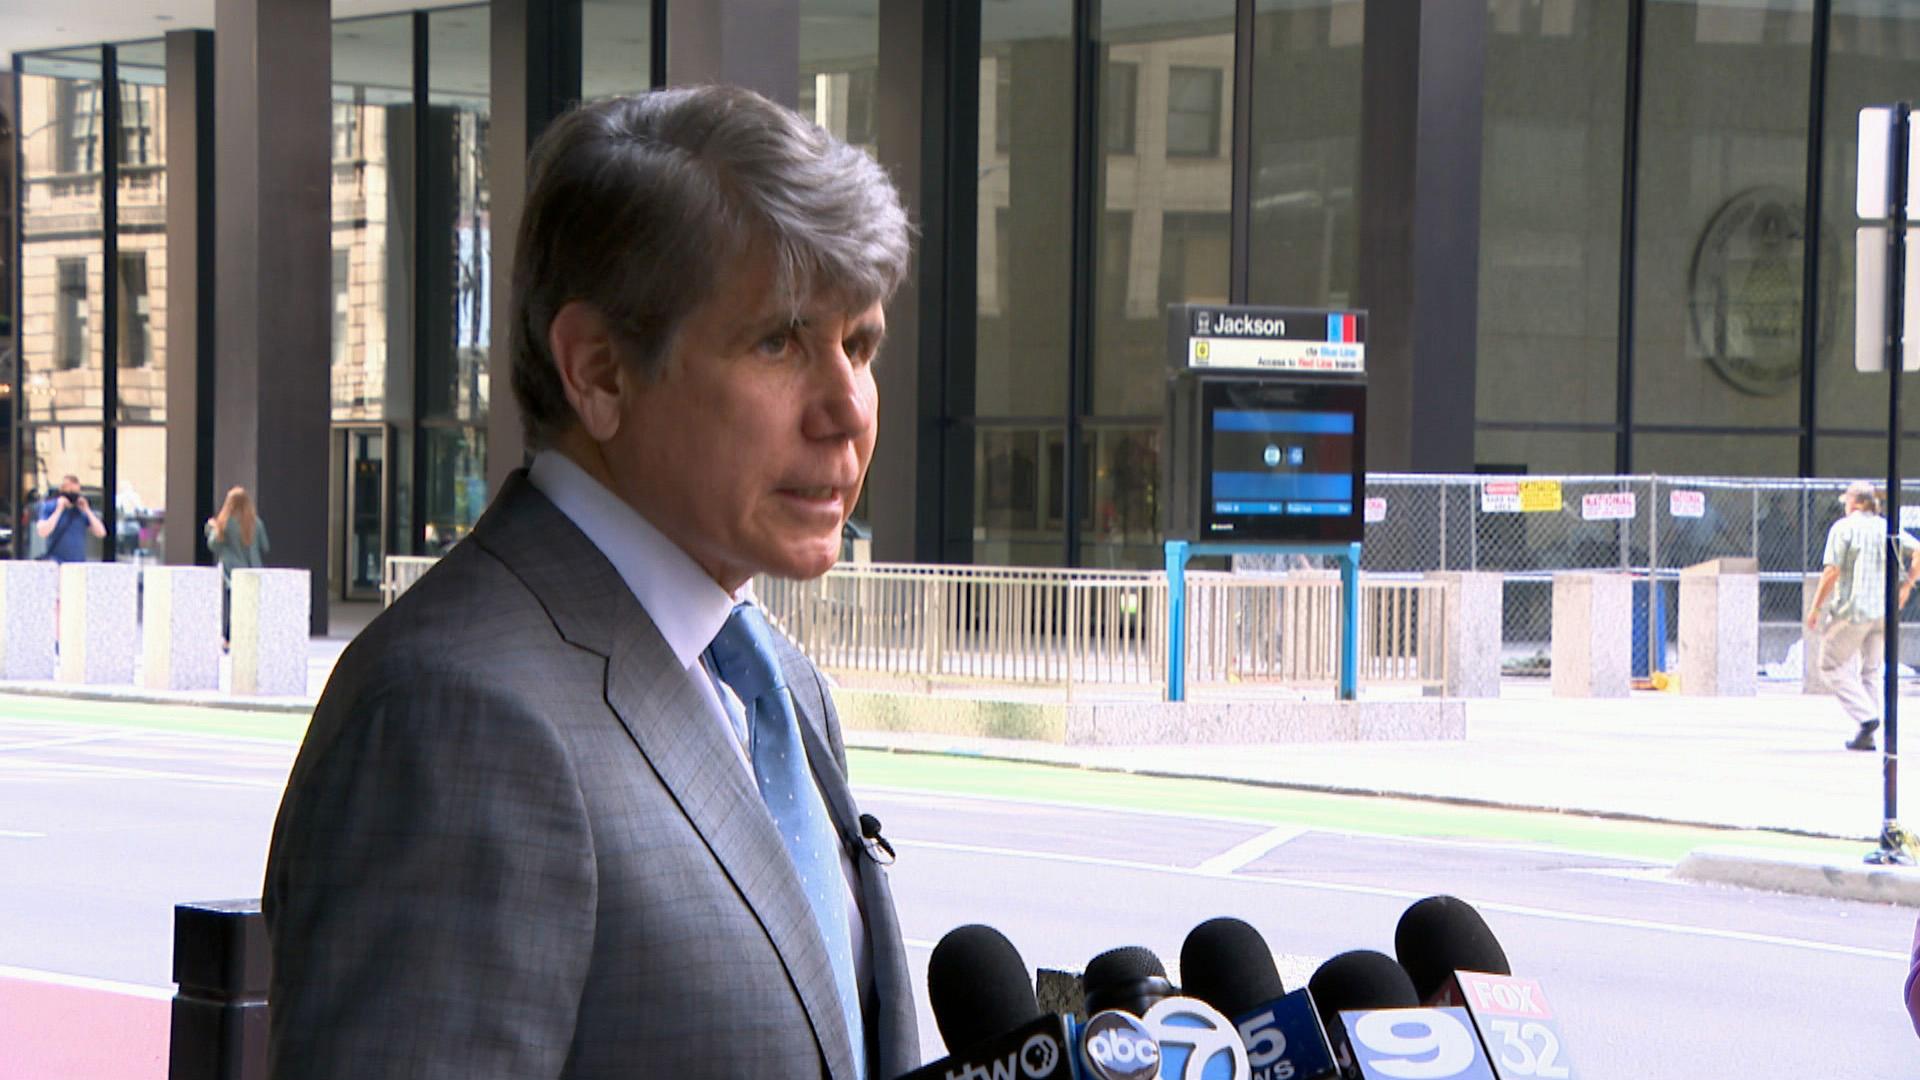 Former Illinois Gov. Rod Blagojevich talks about his criminal complaint outside the Dirksen Federal Building on Monday, Aug. 2, 2021. (WTTW News)